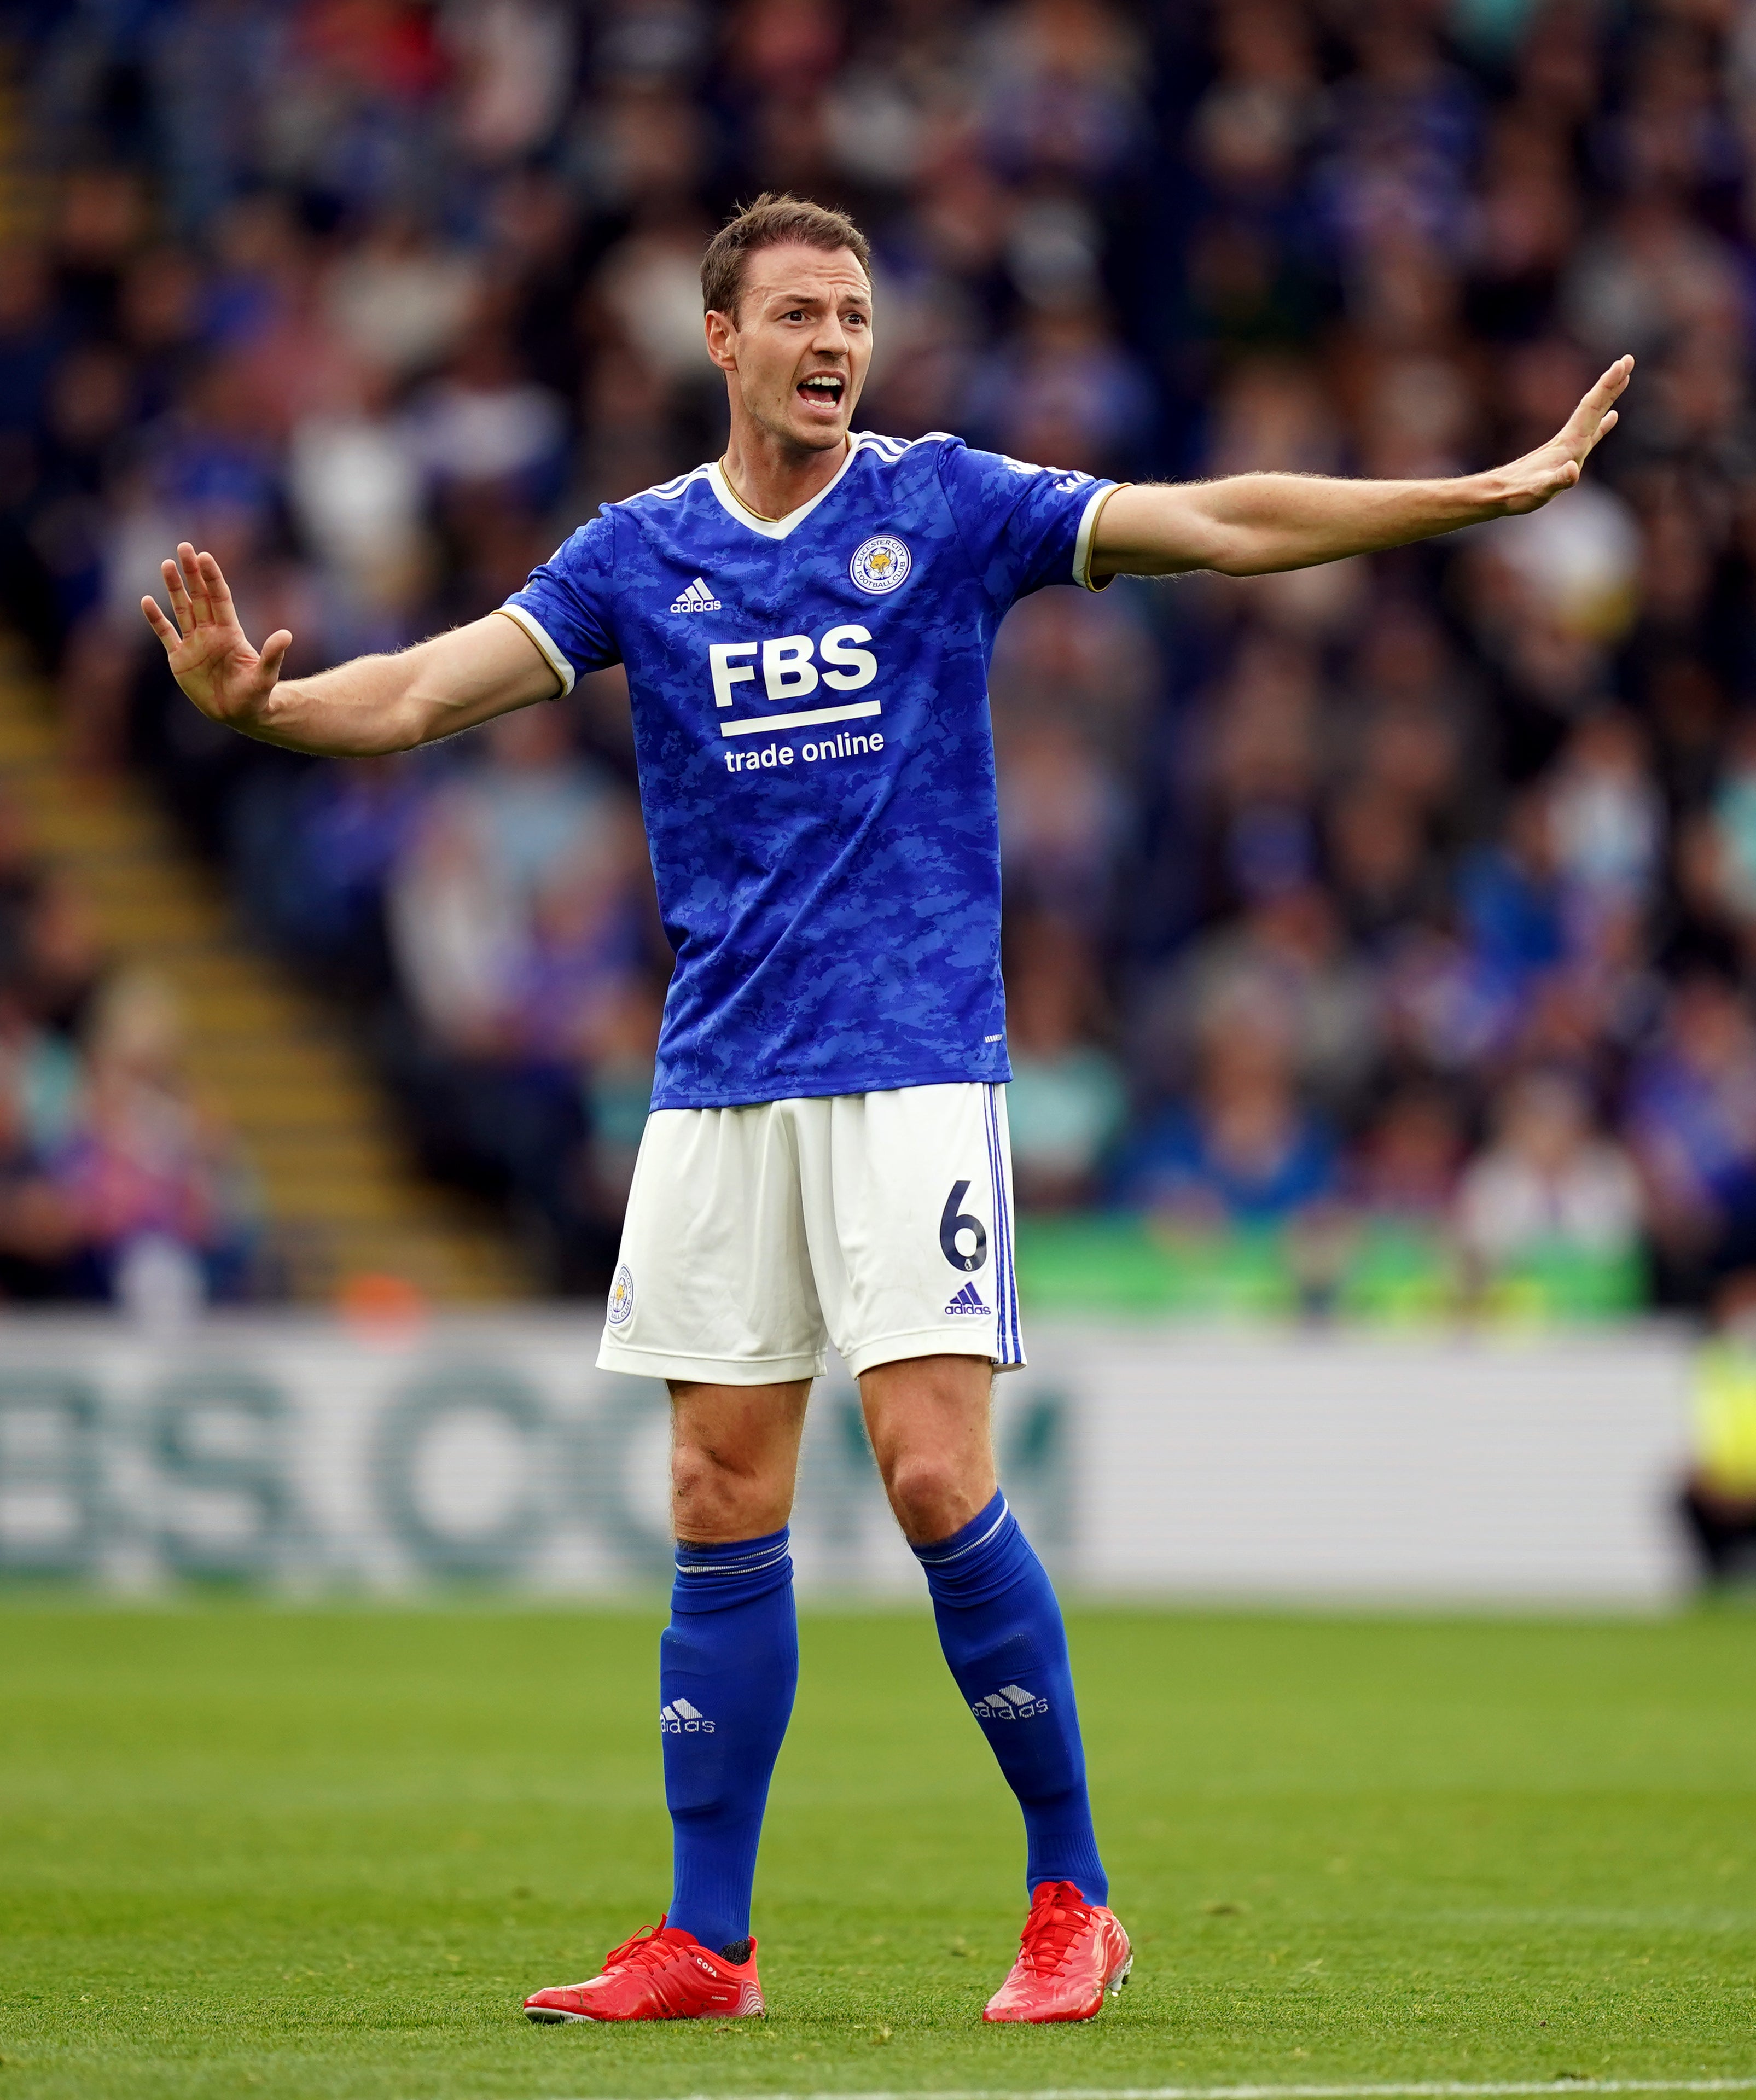 Jonny Evans was injured in the warm up for Leicester (Mike Egerton/PA)